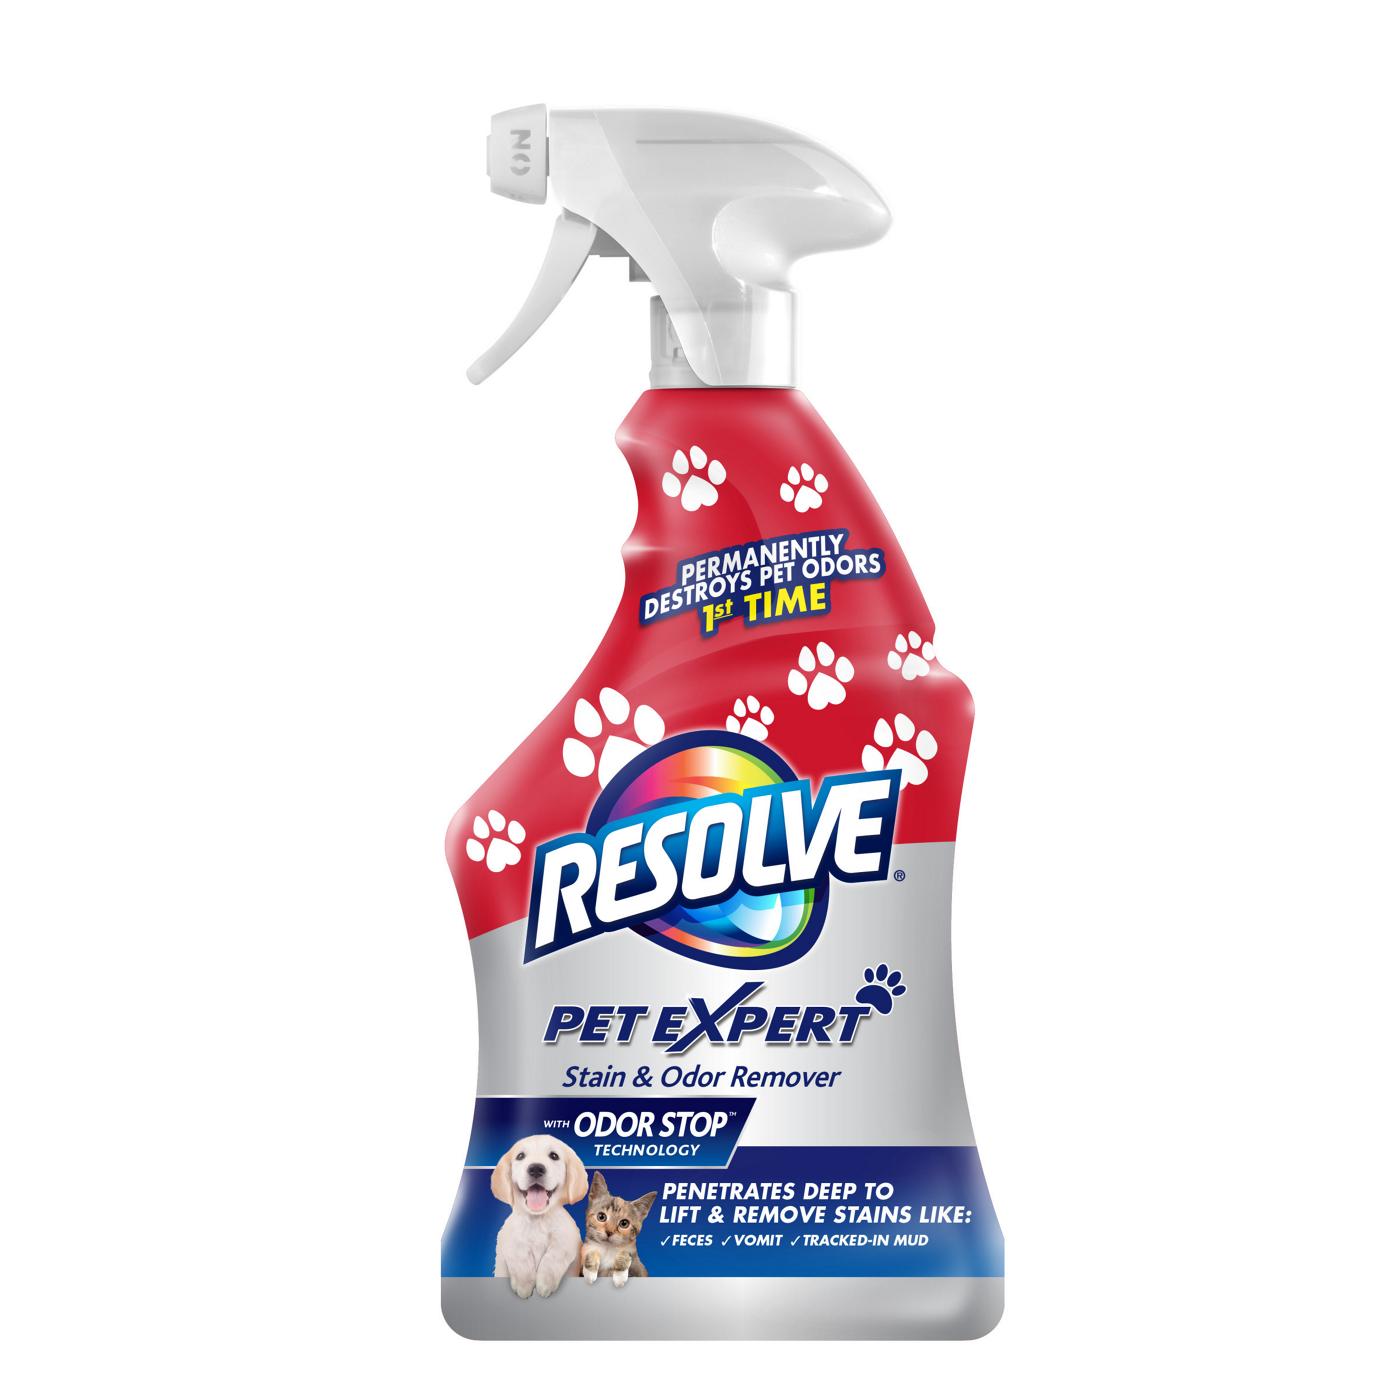 Resolve Pet Expert Carpet & Upholstery Stain Remover; image 1 of 5